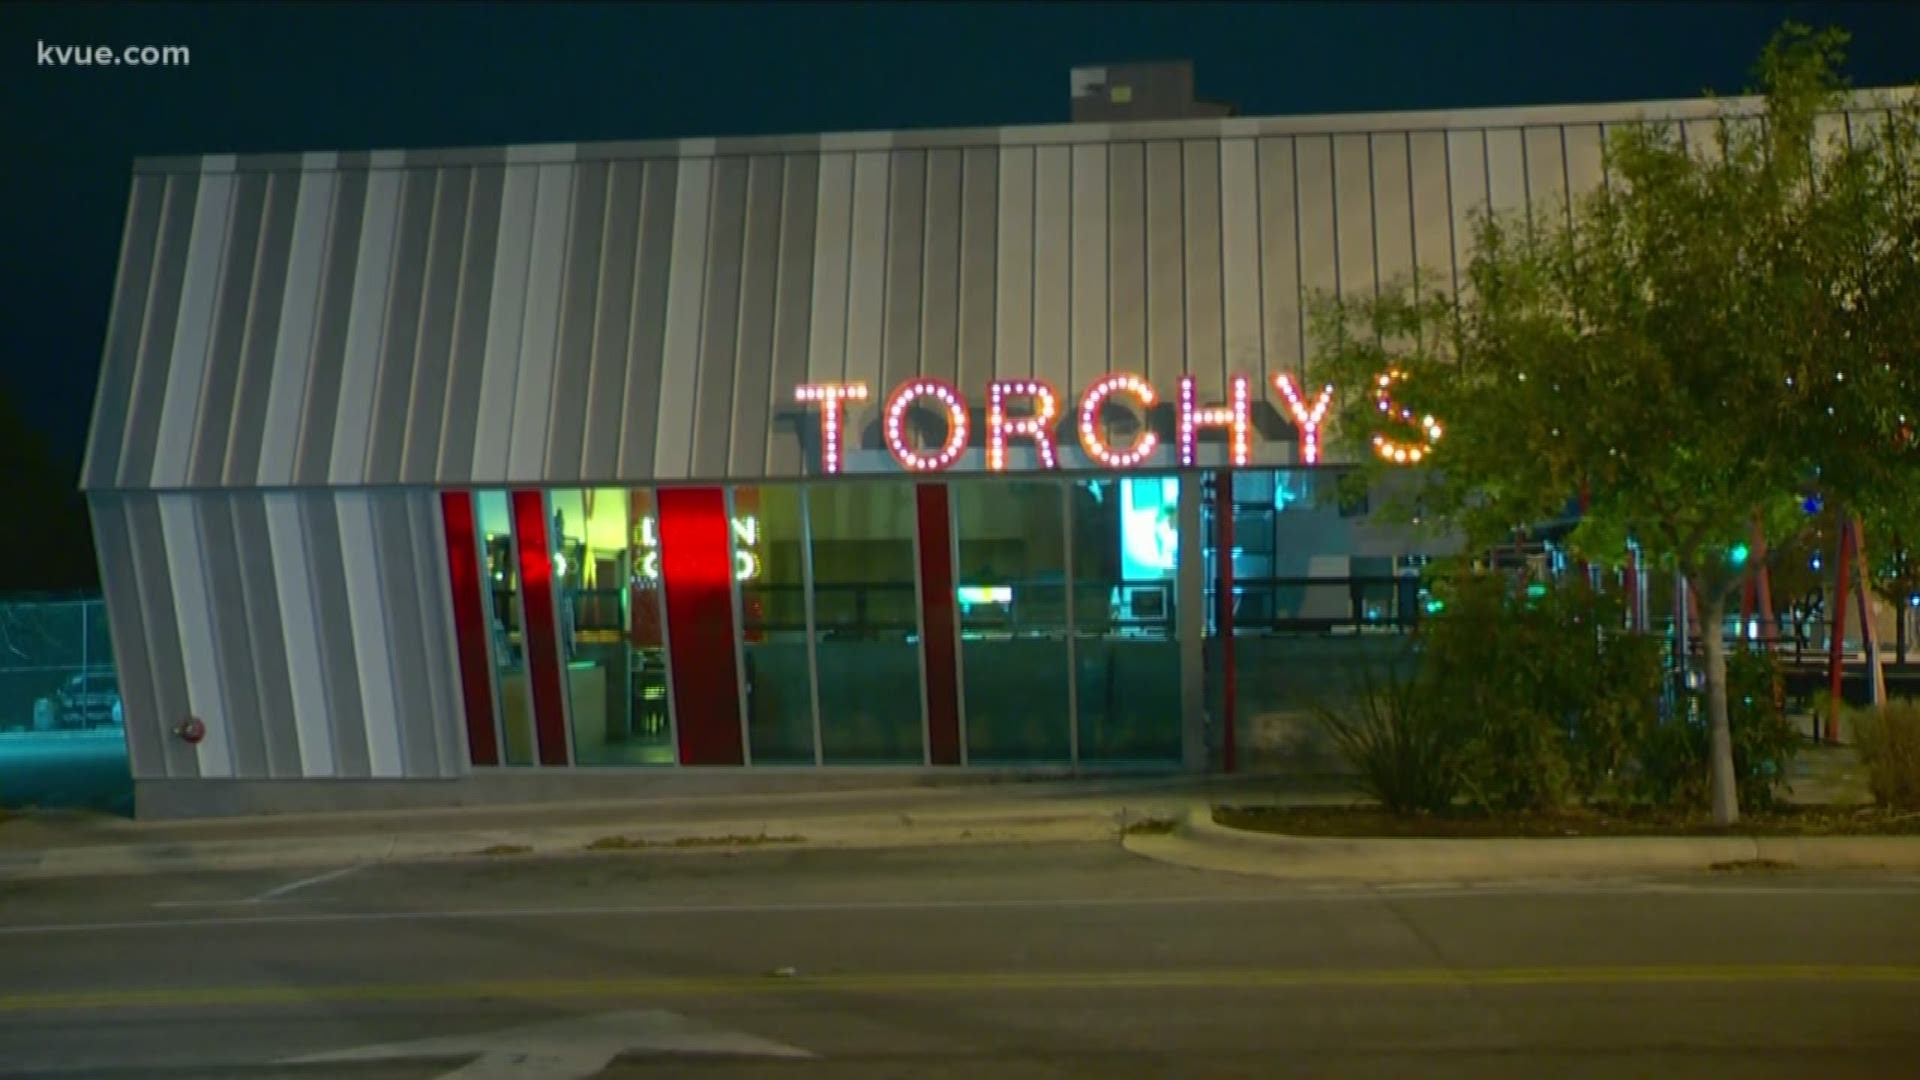 It seems like the rest of the country is finally catching up to what Texans already know -- Torchy's is delicious.